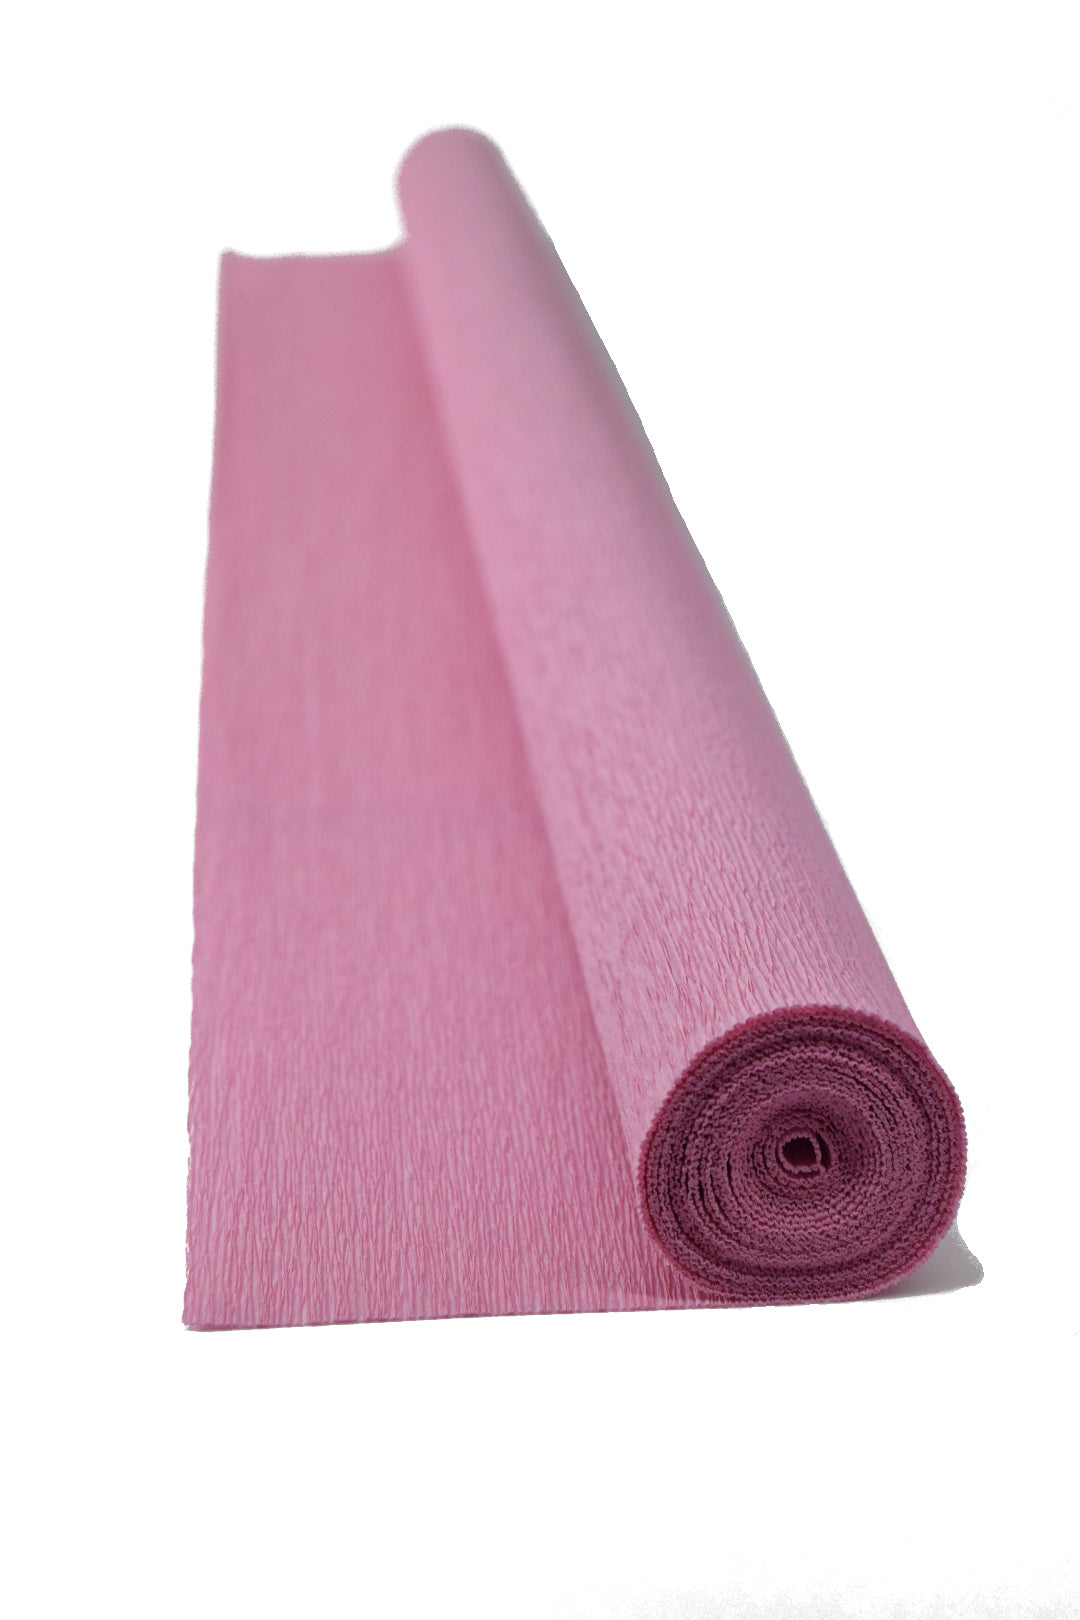 90g crepe paper - Candy pink 384 - 25 cm x 1.50 m